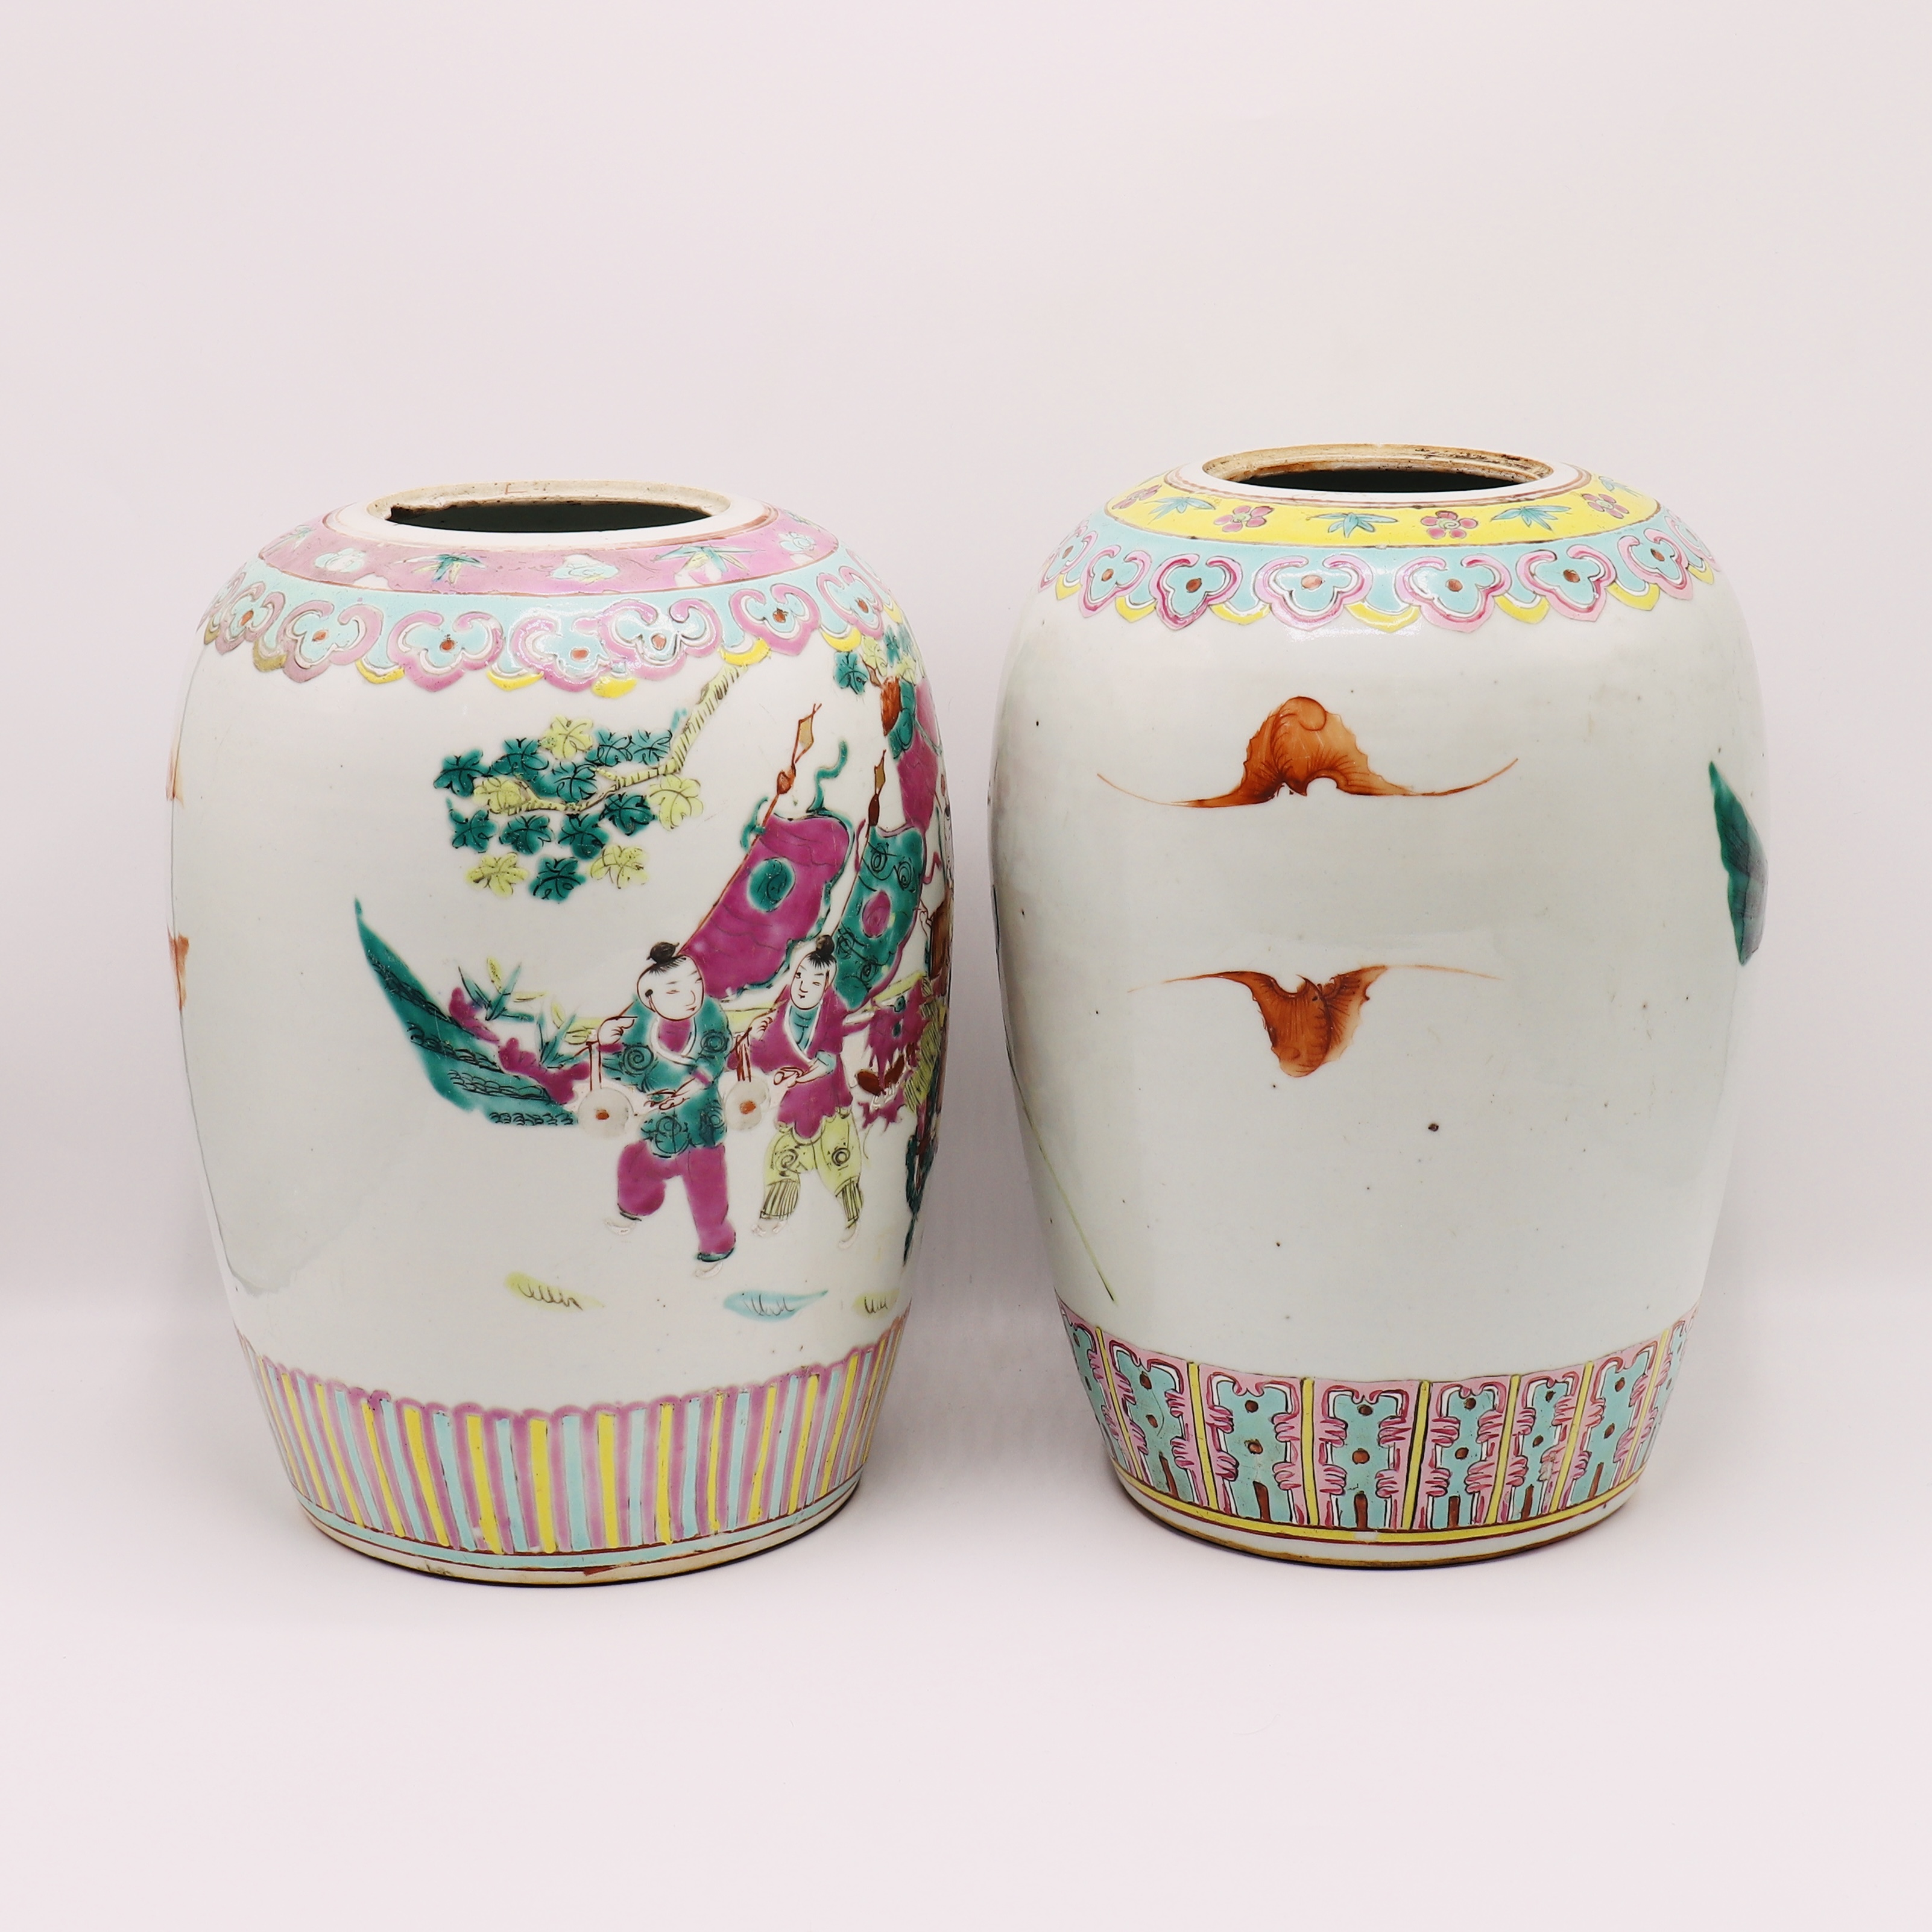 TWO LARGE CHINESE FAMILLE ROSE VASES, QING DYNASTY (1644-1911) - Image 3 of 5